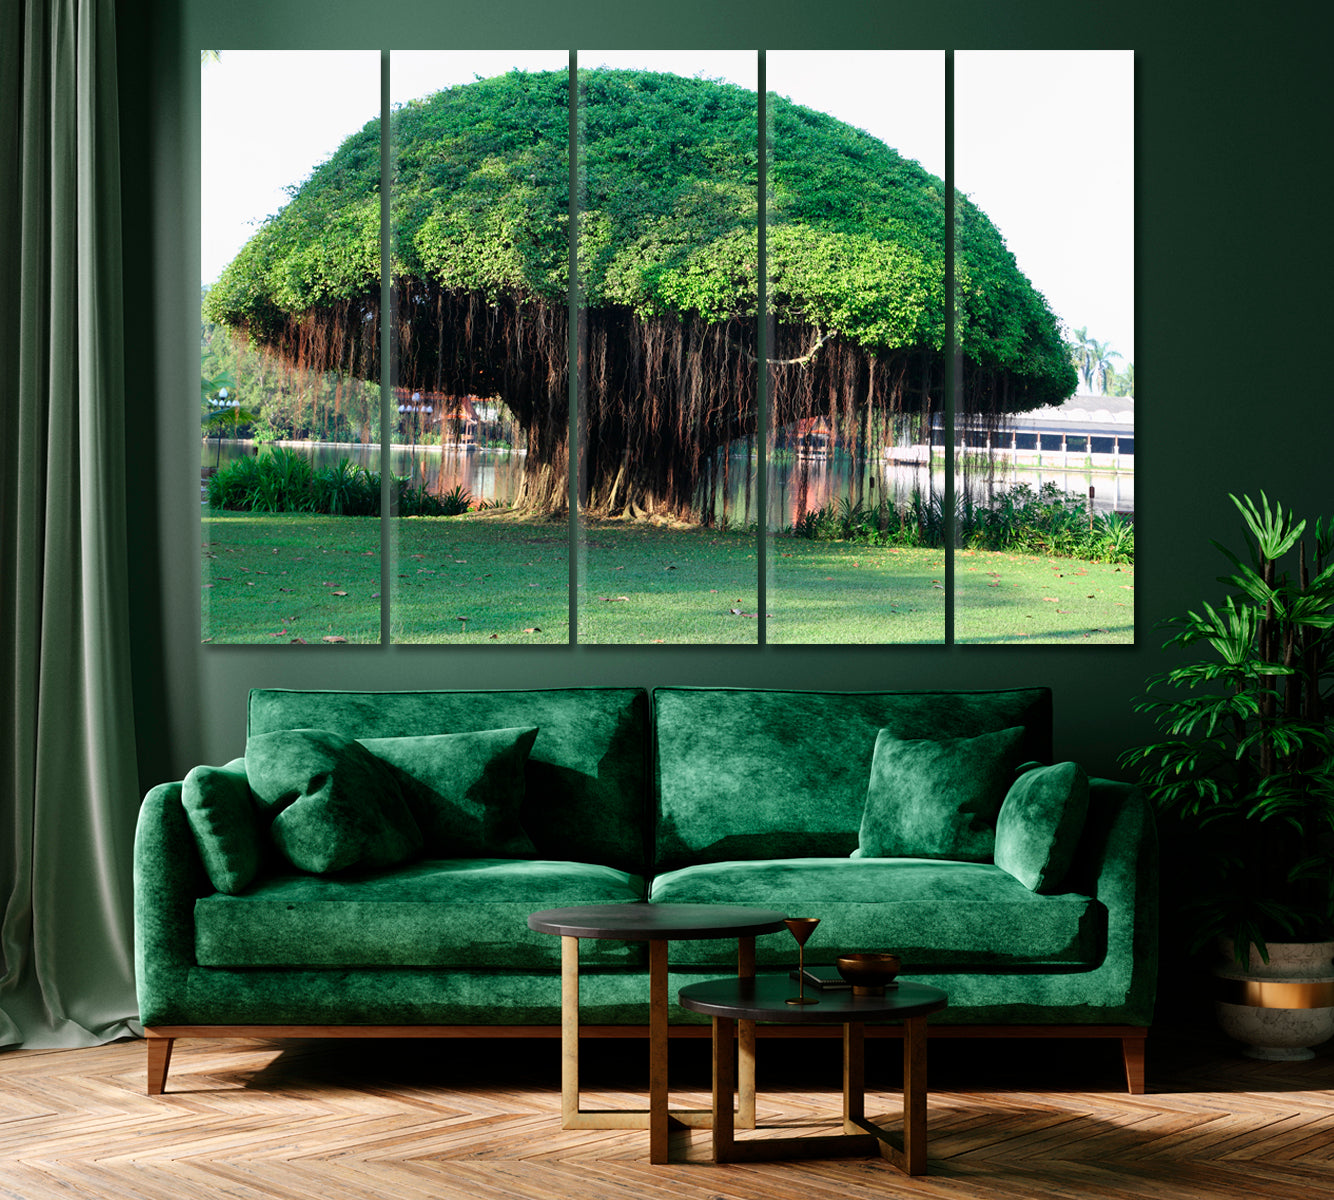 Old Banyan Tree Canvas Print ArtLexy 5 Panels 36"x24" inches 